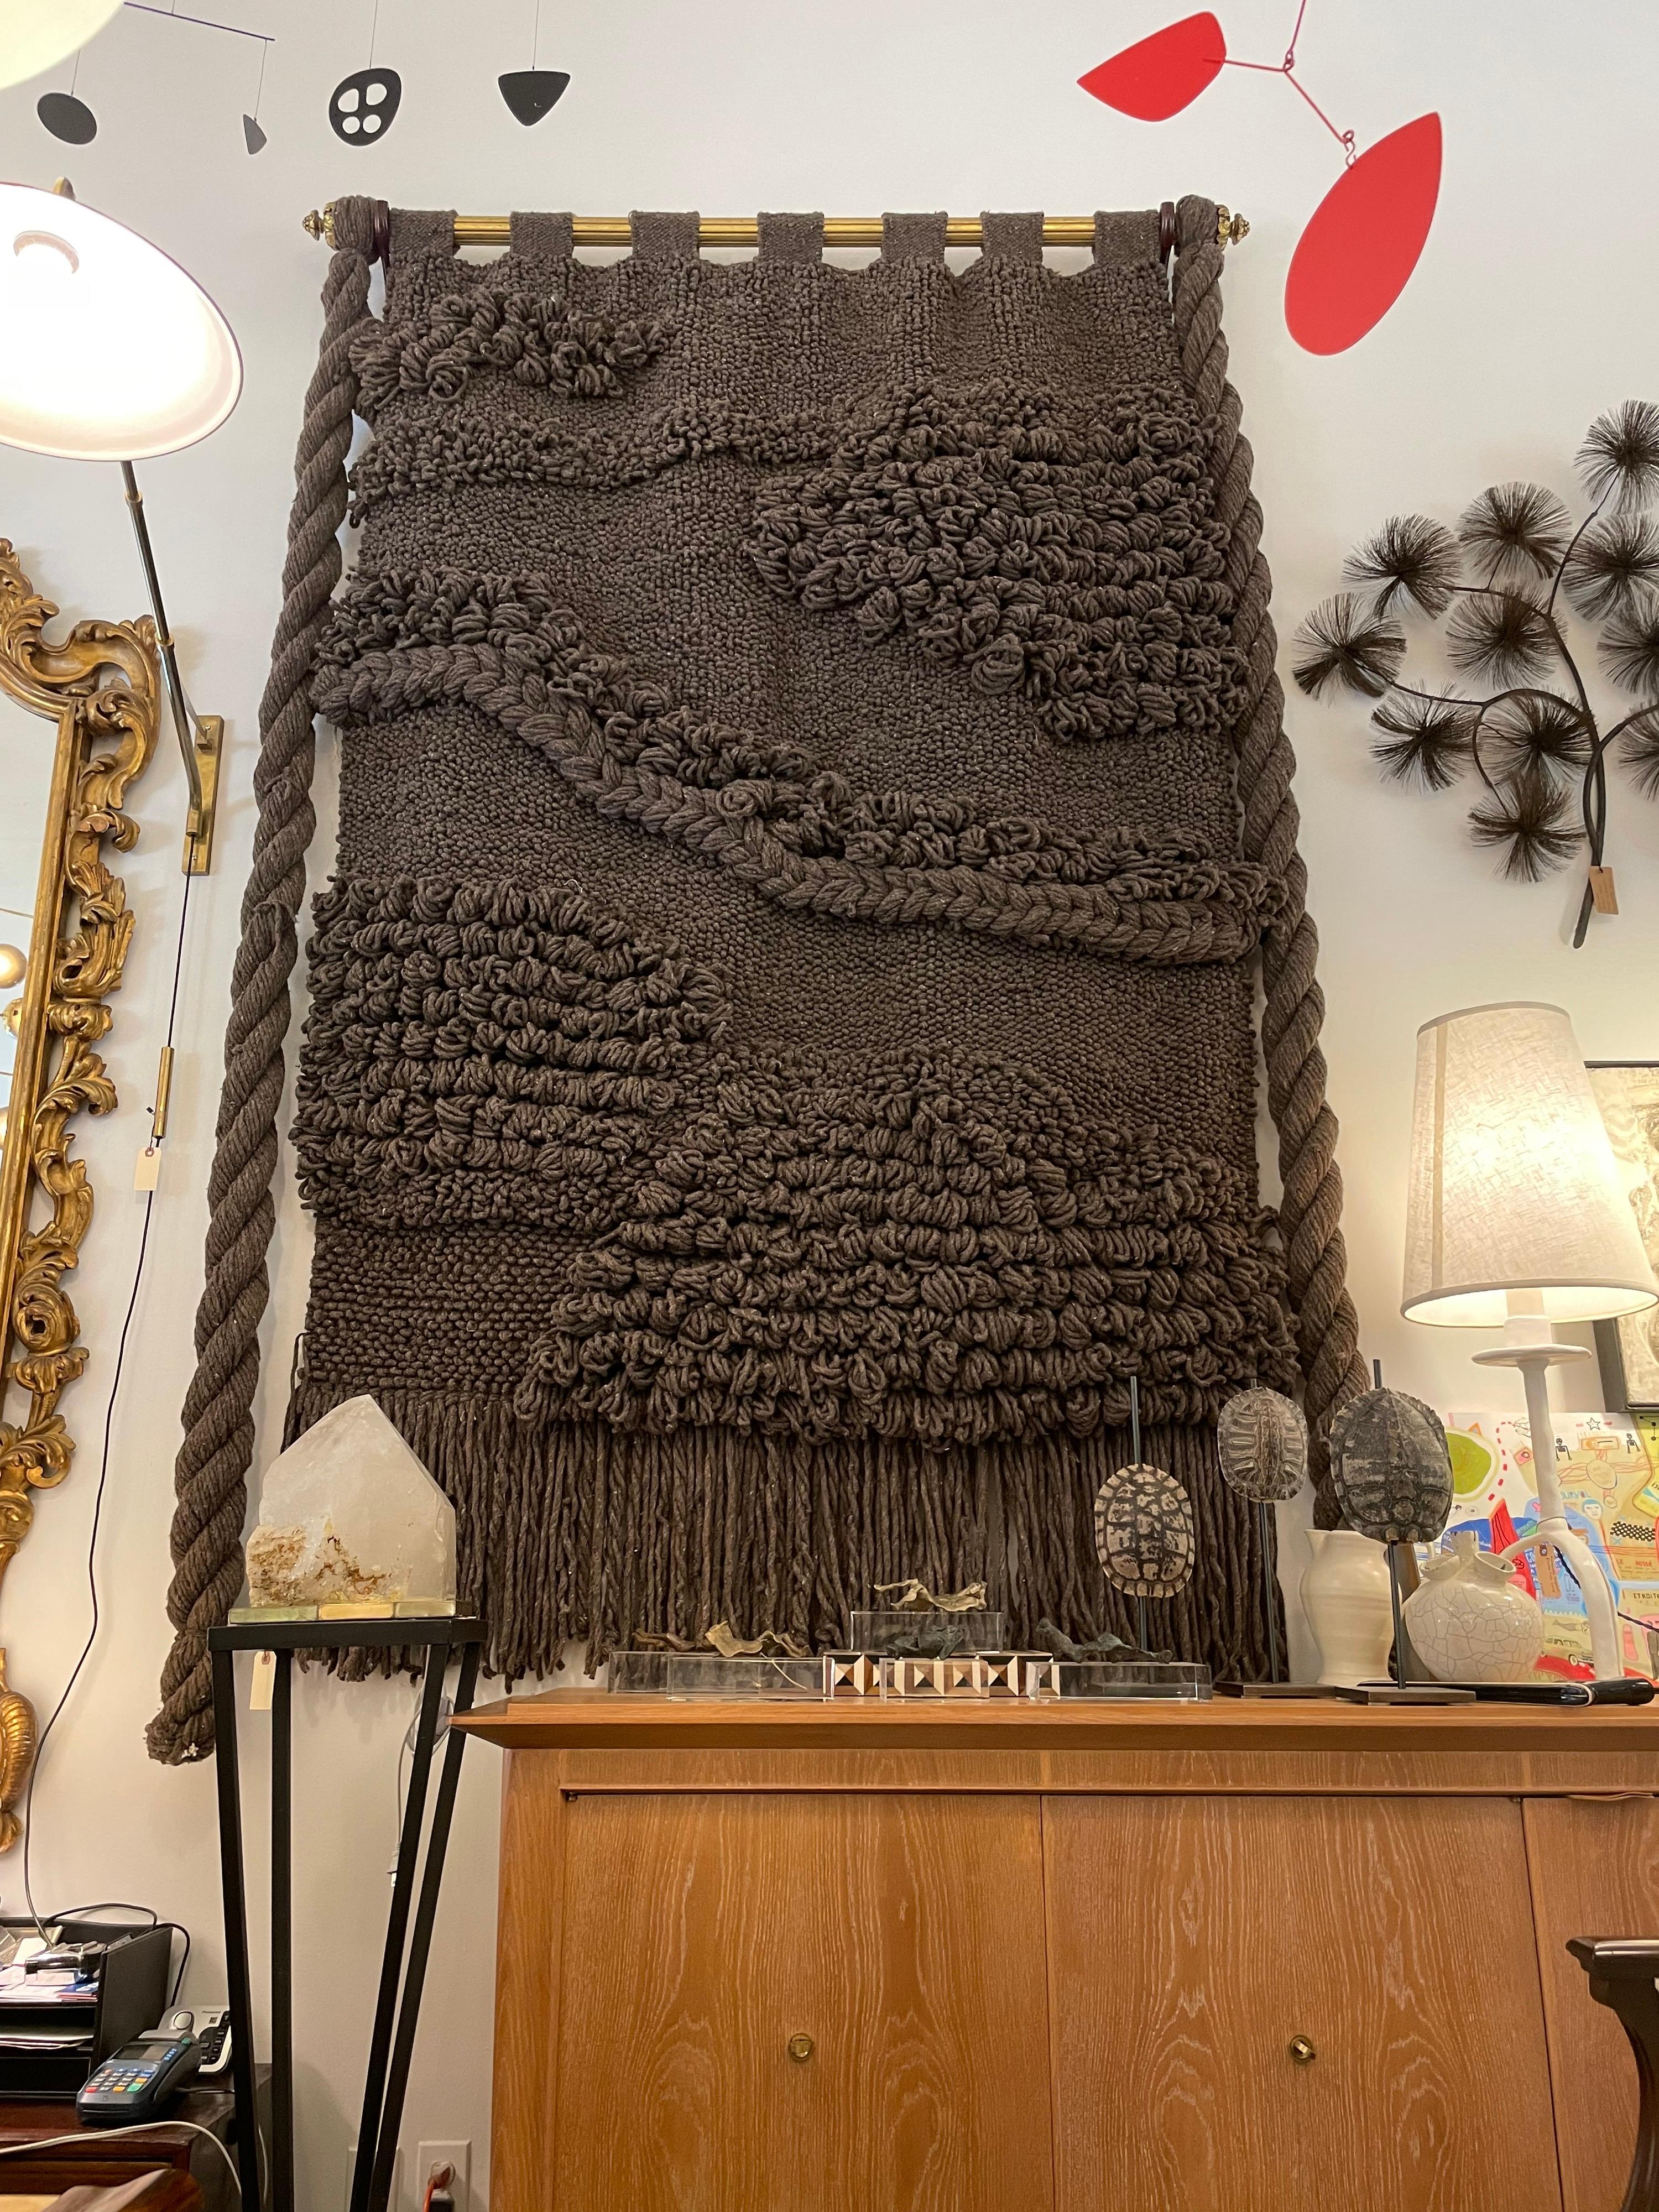 This amazing large wool tapestry with chunky knots and weavings hanging on a custom gilt wood rod is nearly 9 feet long and nearly 6 feet wide. What an important hand made wall art with all natural dyed wood tones.

 